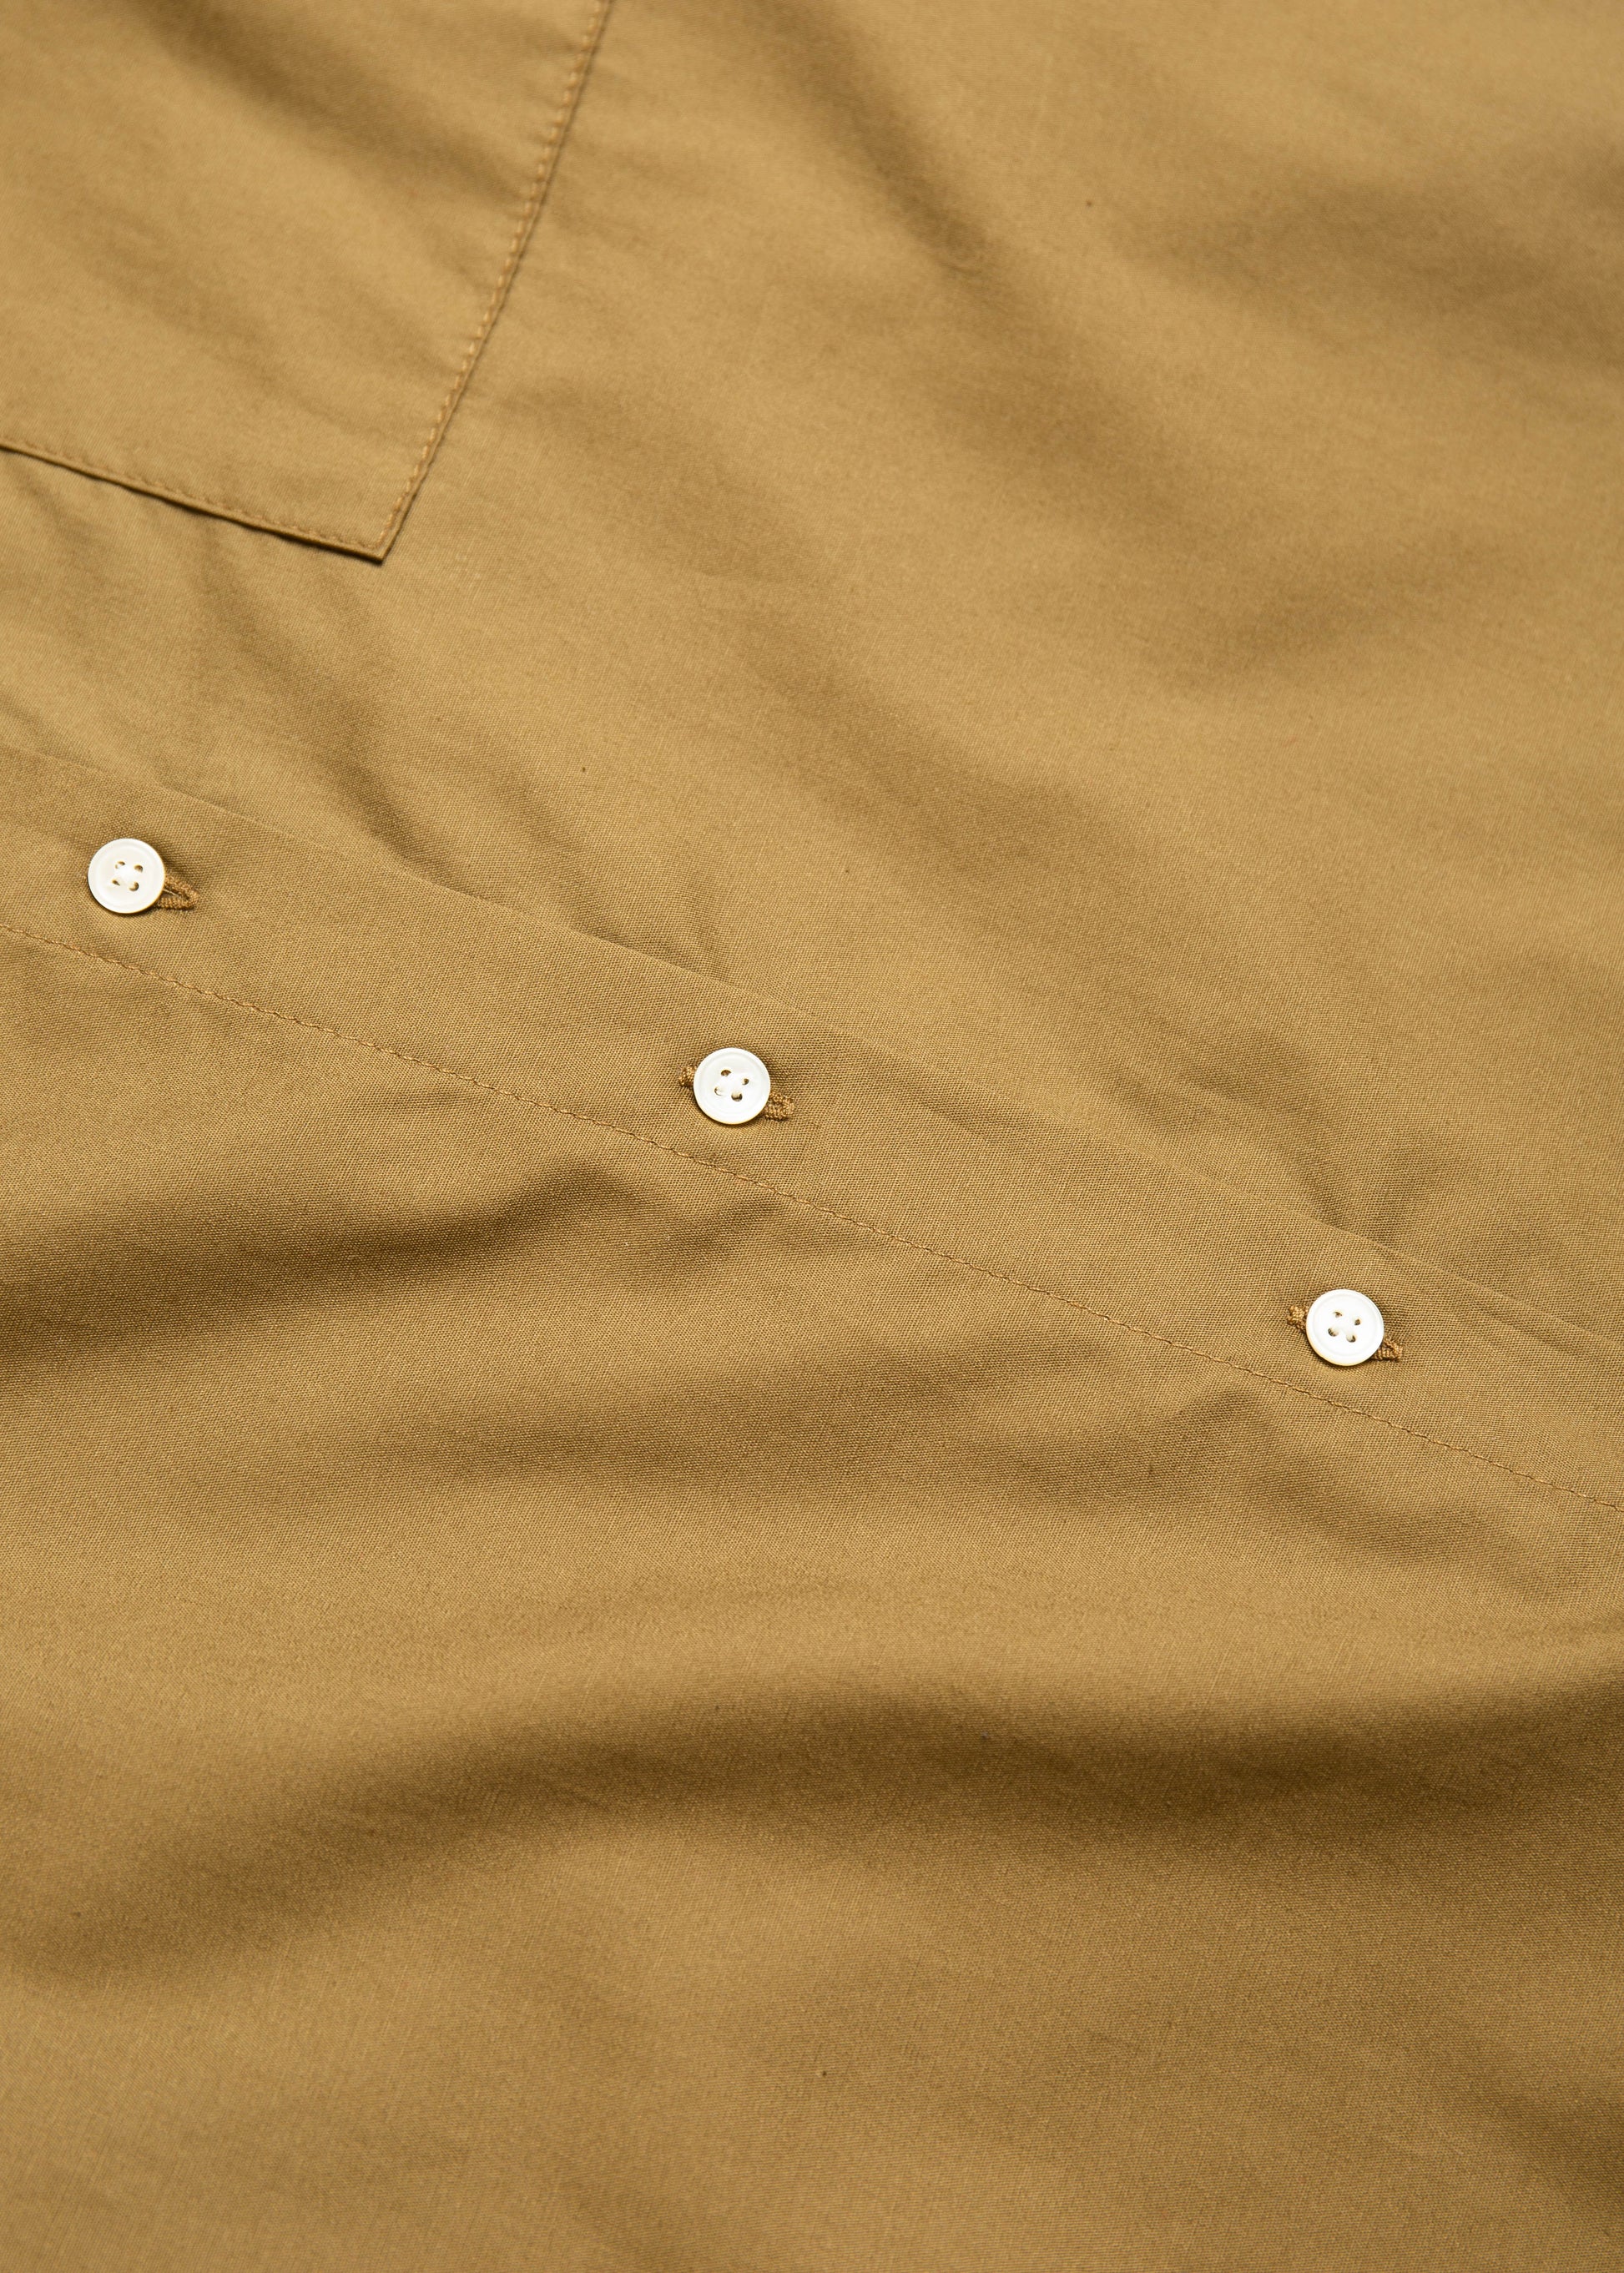 close up of front lucy shirt buttons